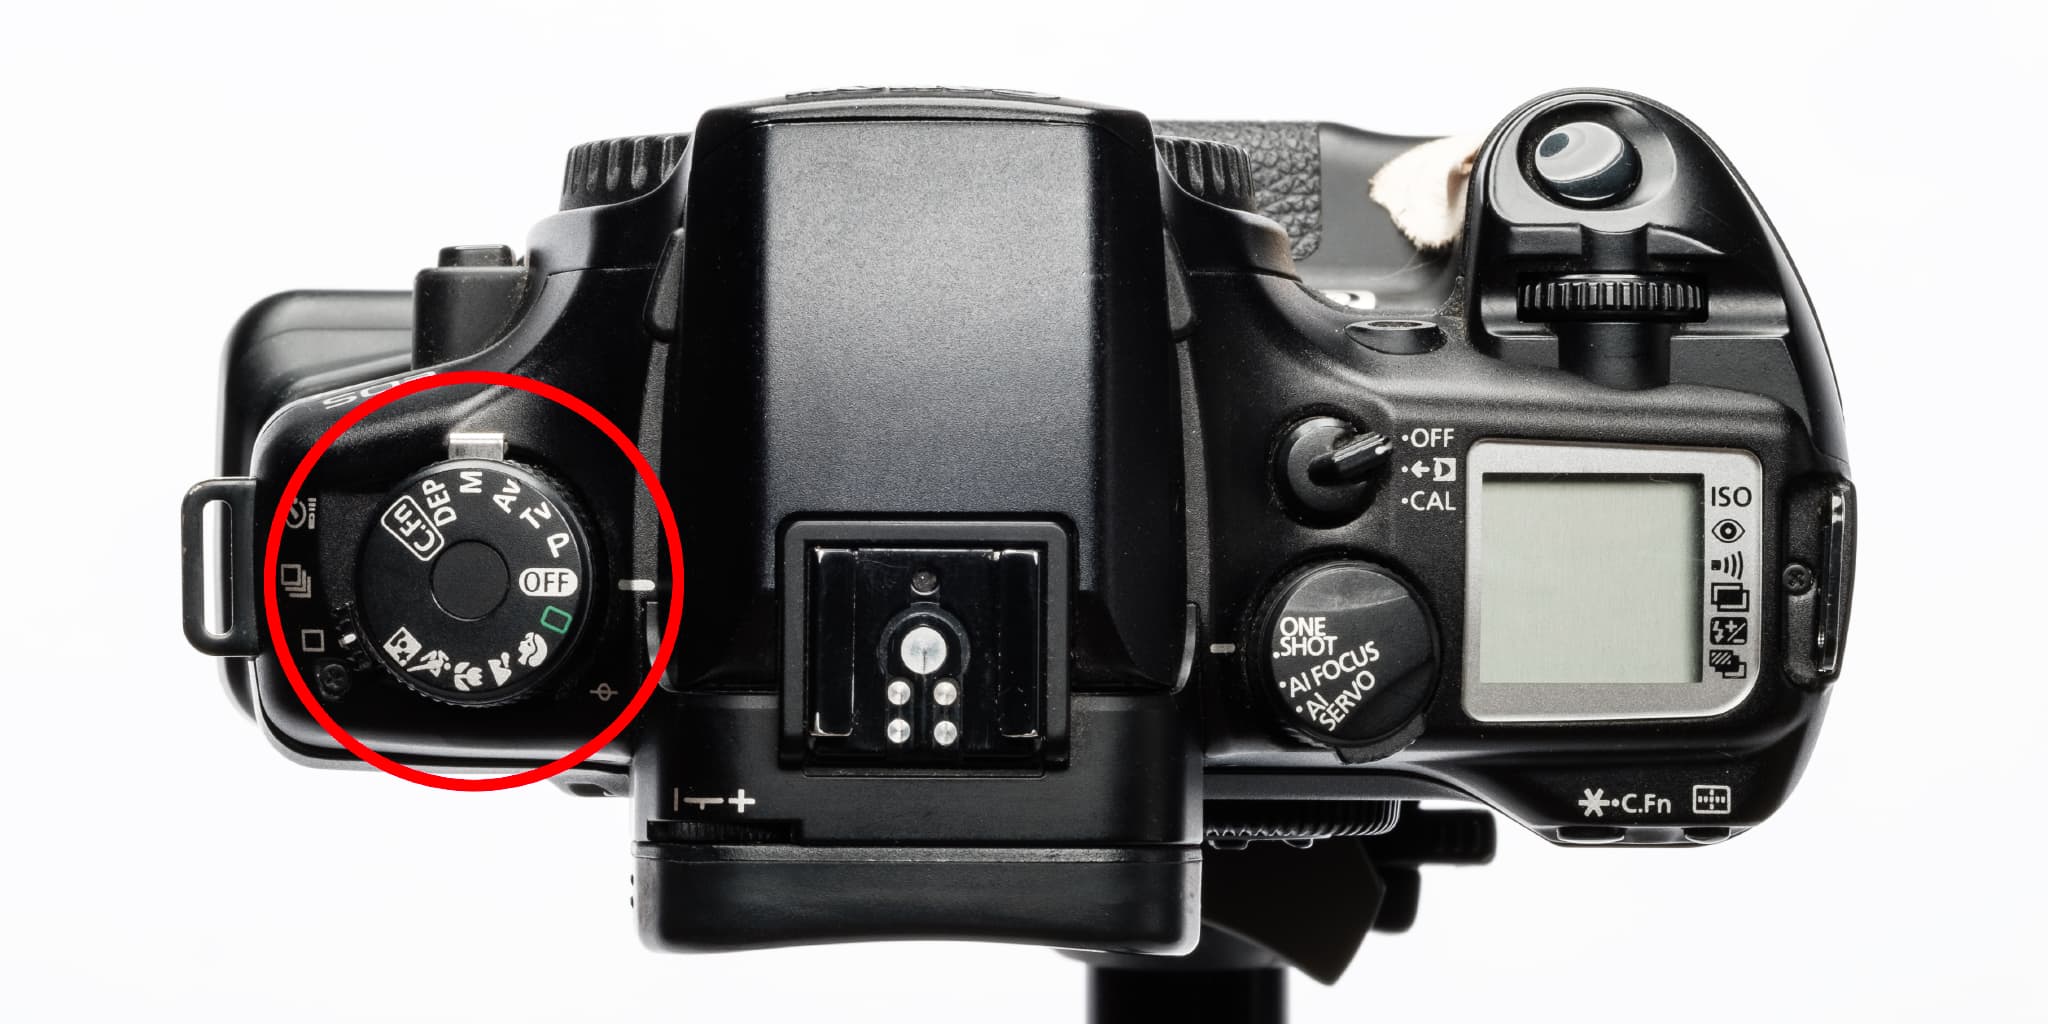 The shooting mode dial's location on a camera.